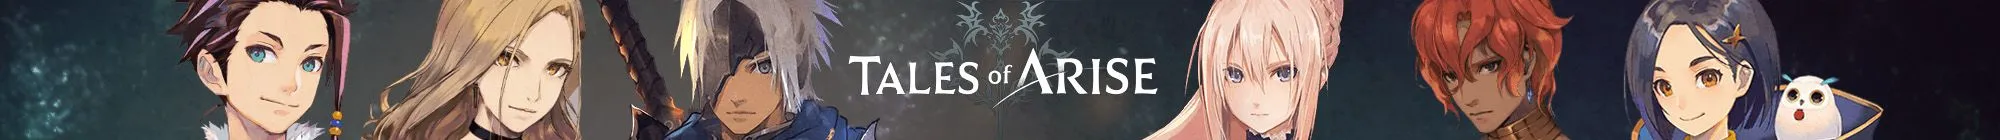 stories-of-arise-banner